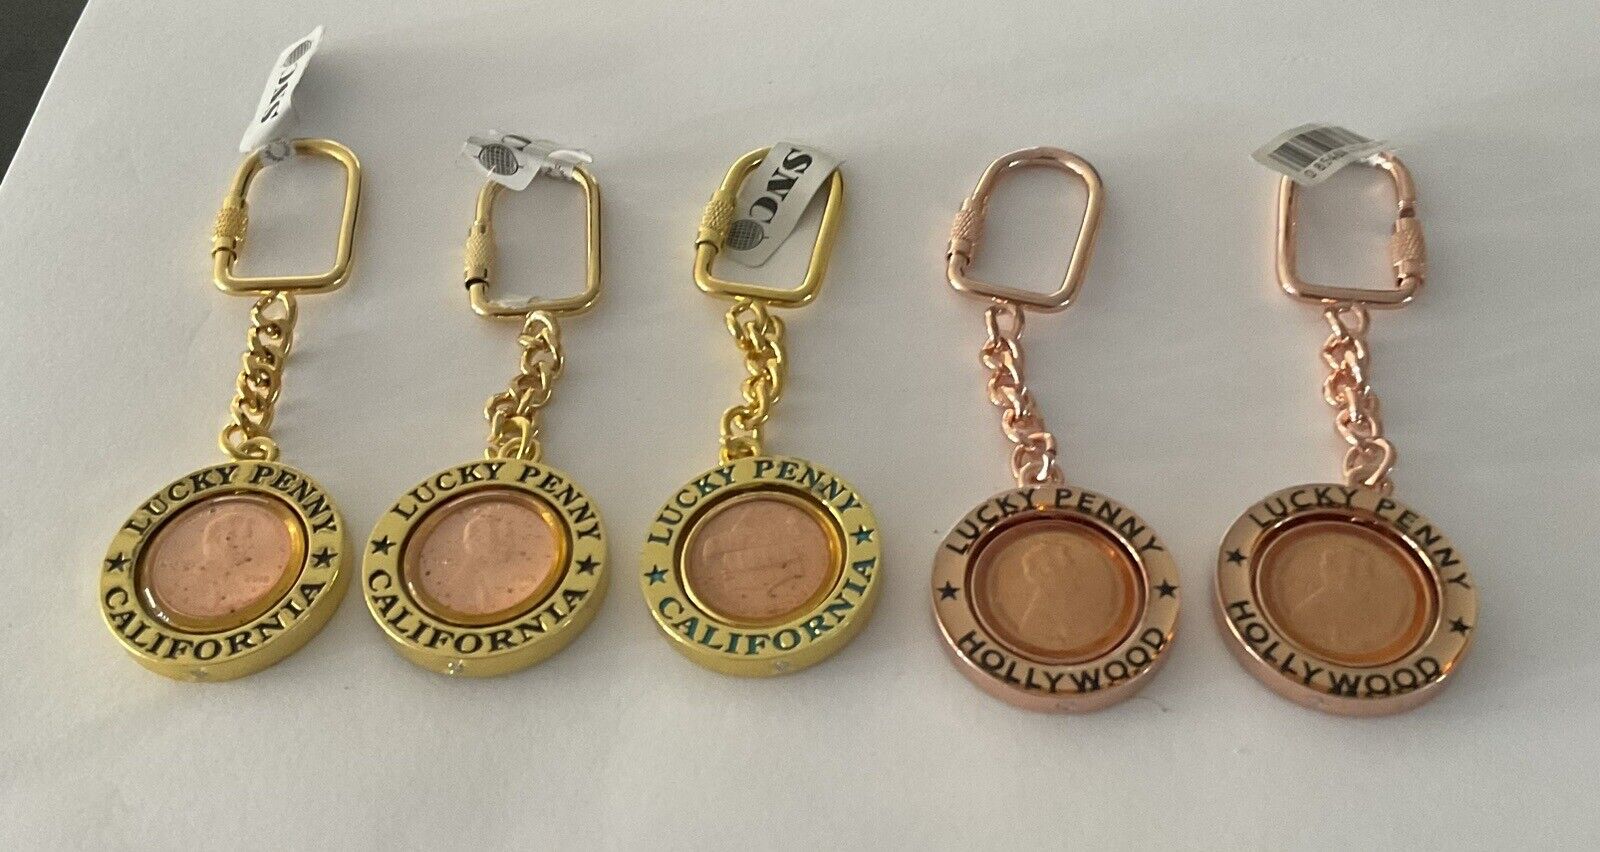 Lot If 5 Lucky Penny Hollywood California Keychains 